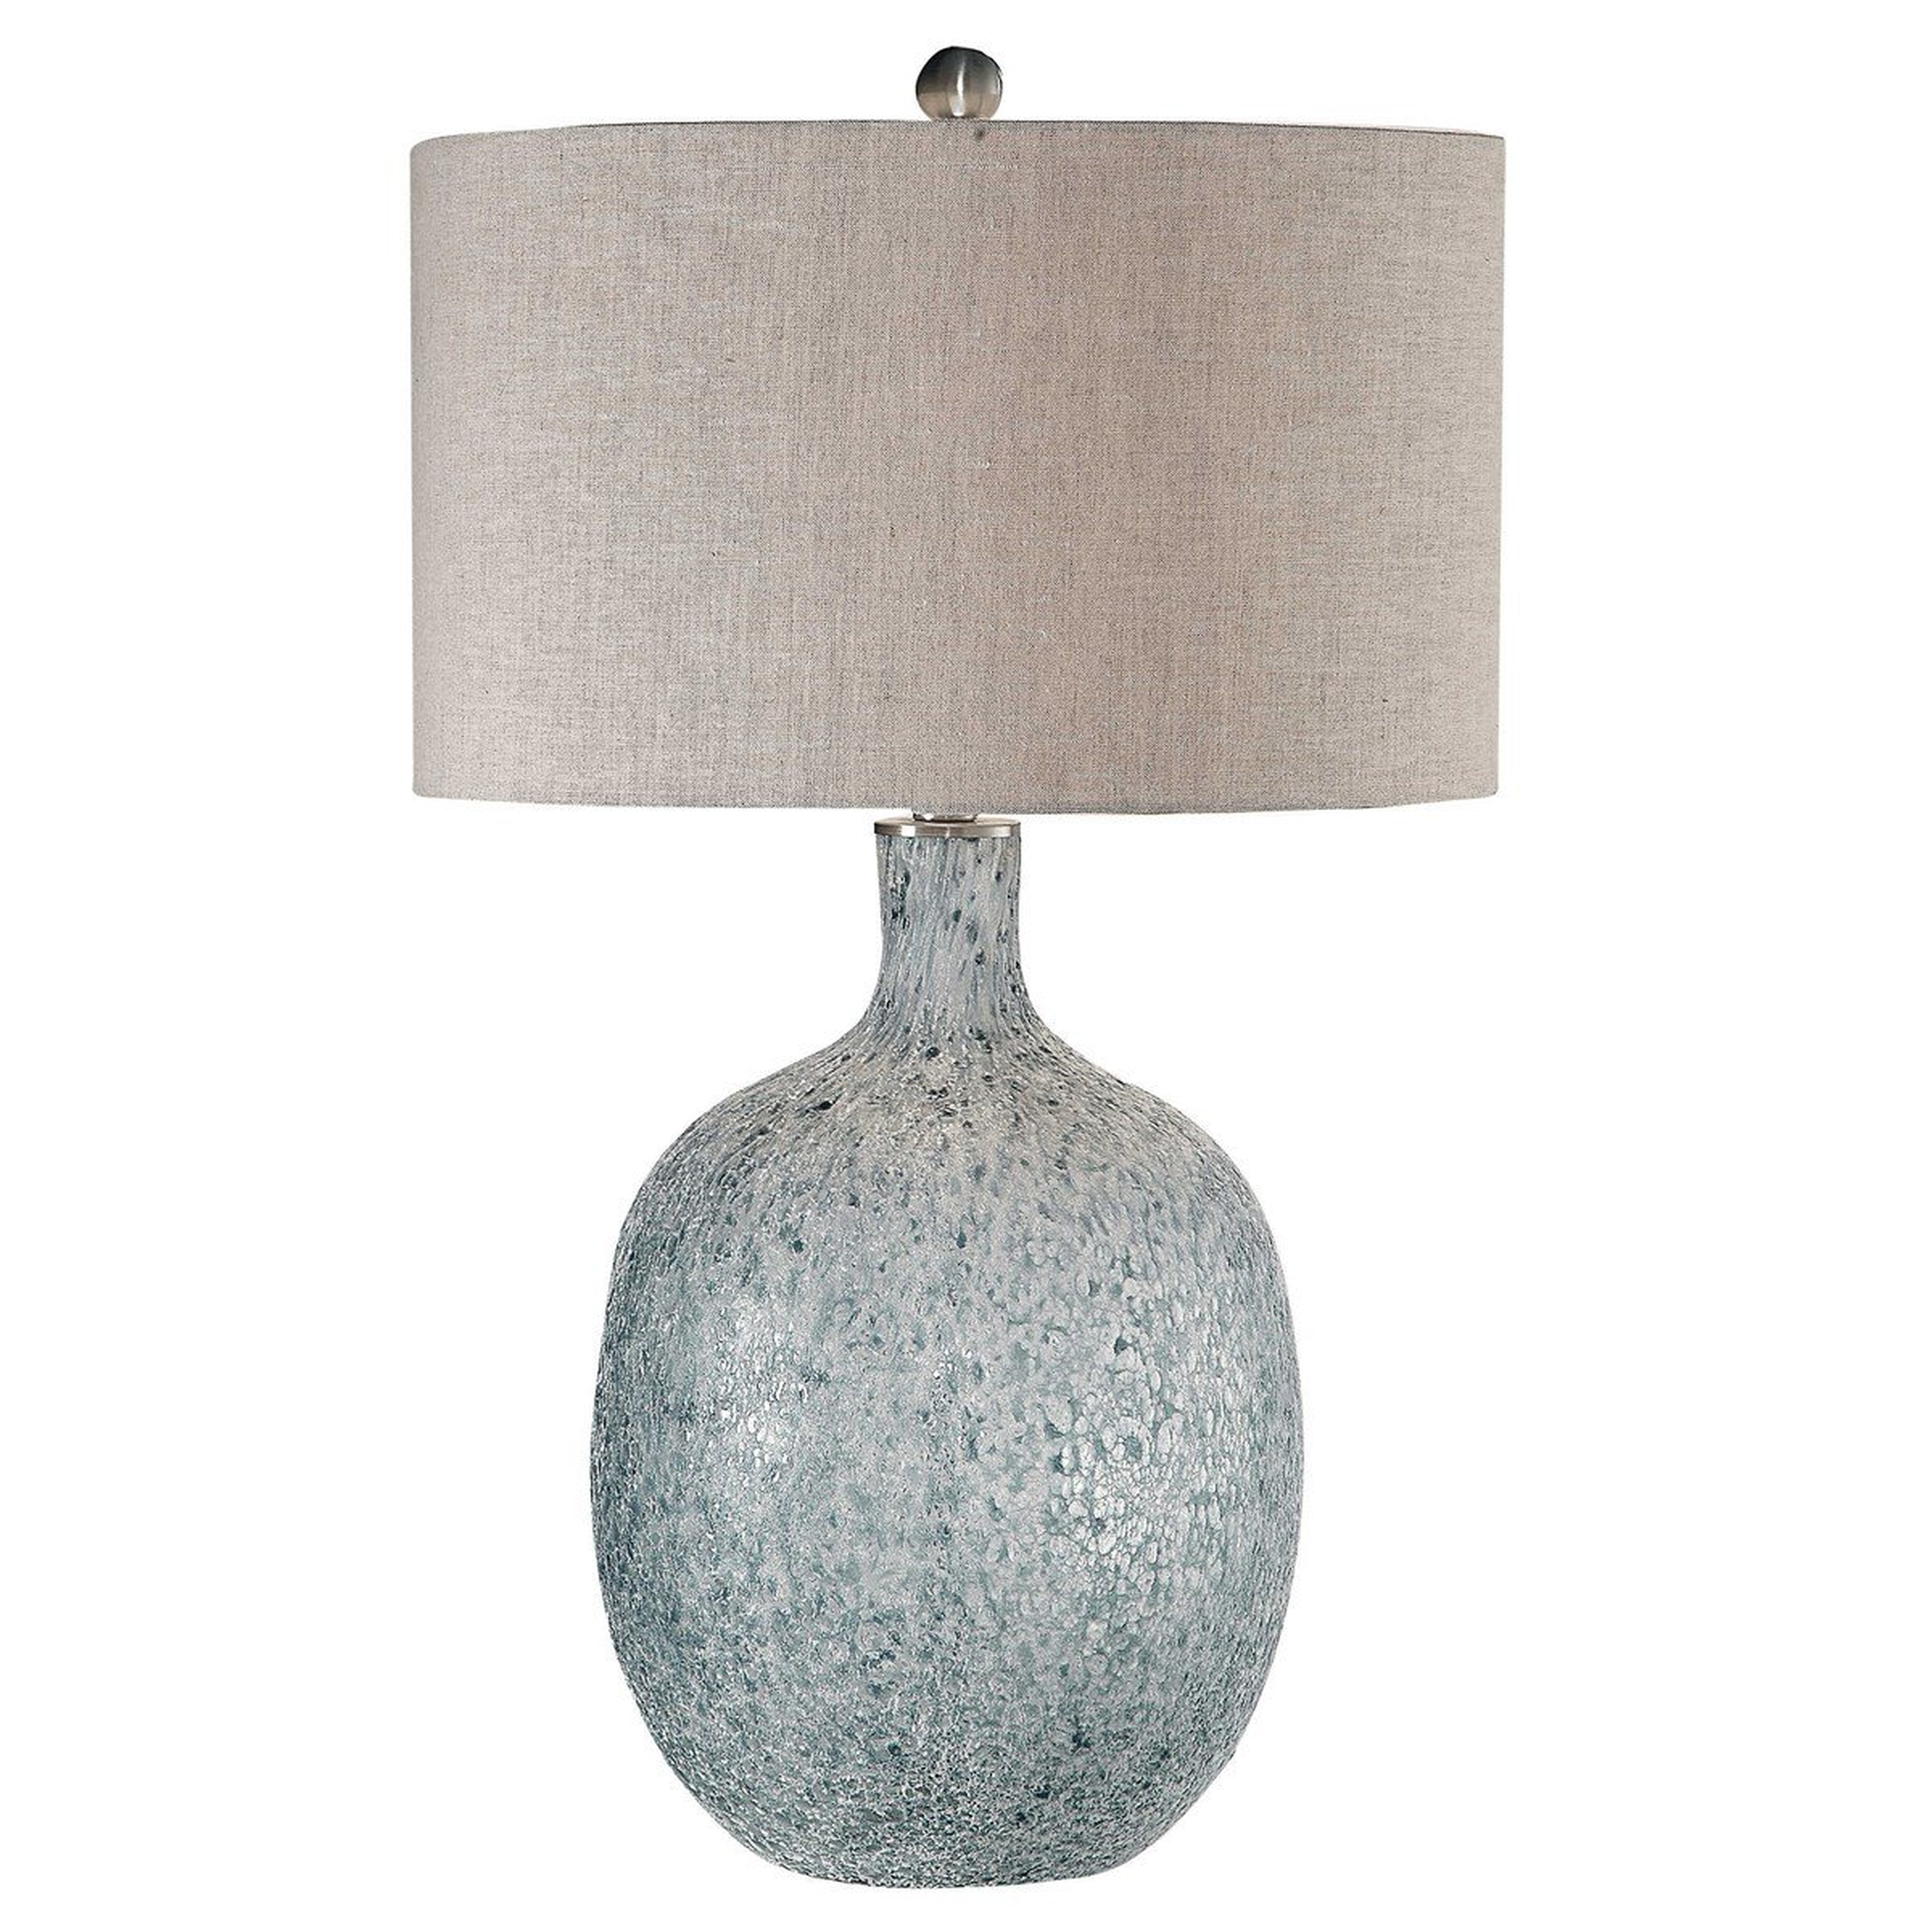 OCEAONNA TABLE LAMP - Hudsonhill Foundry